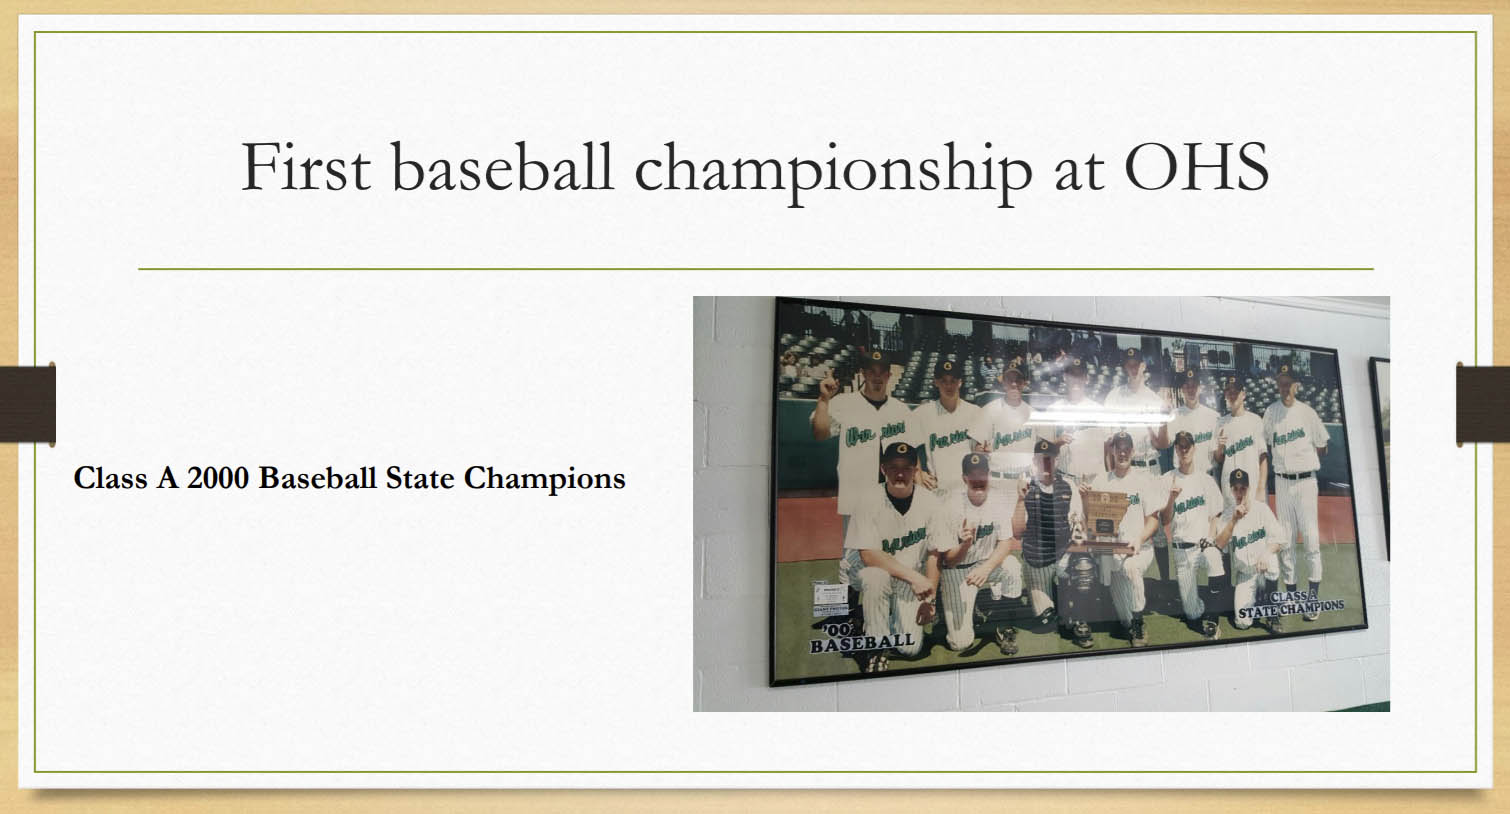 A screenshot from a presentation showing high school baseball players in a team photo.